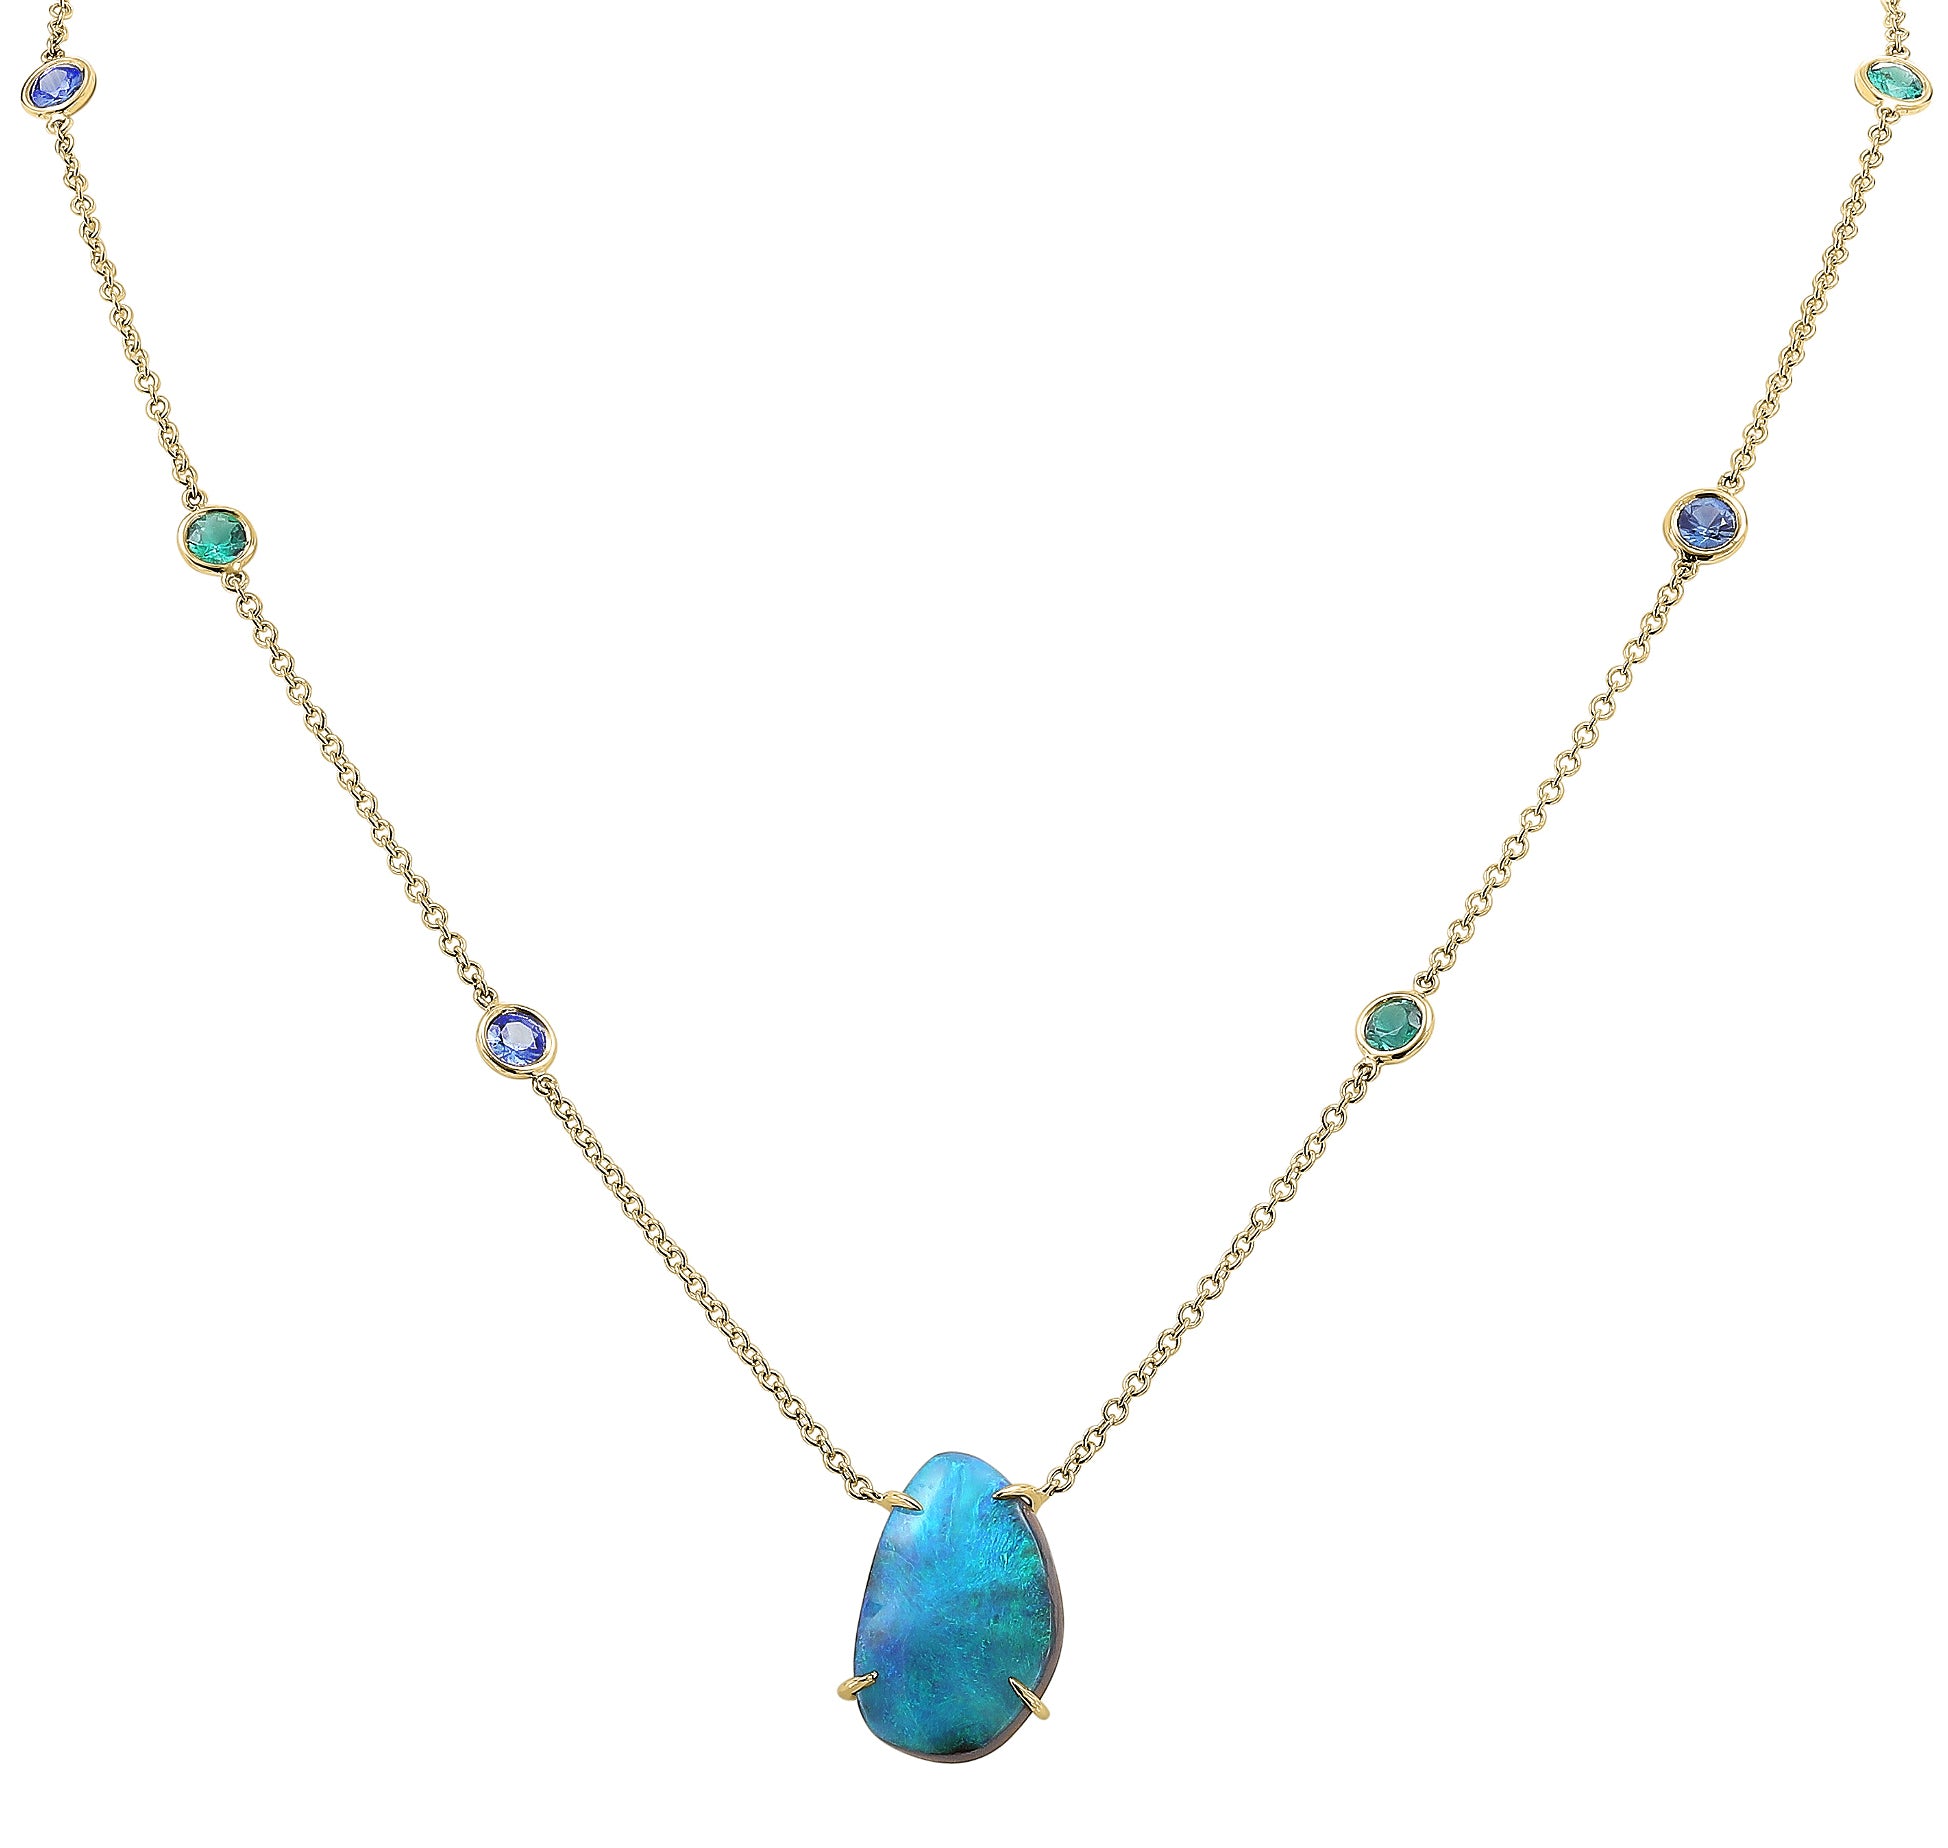 Australian Boulder Opal Necklace with Emeralds and Sapphires